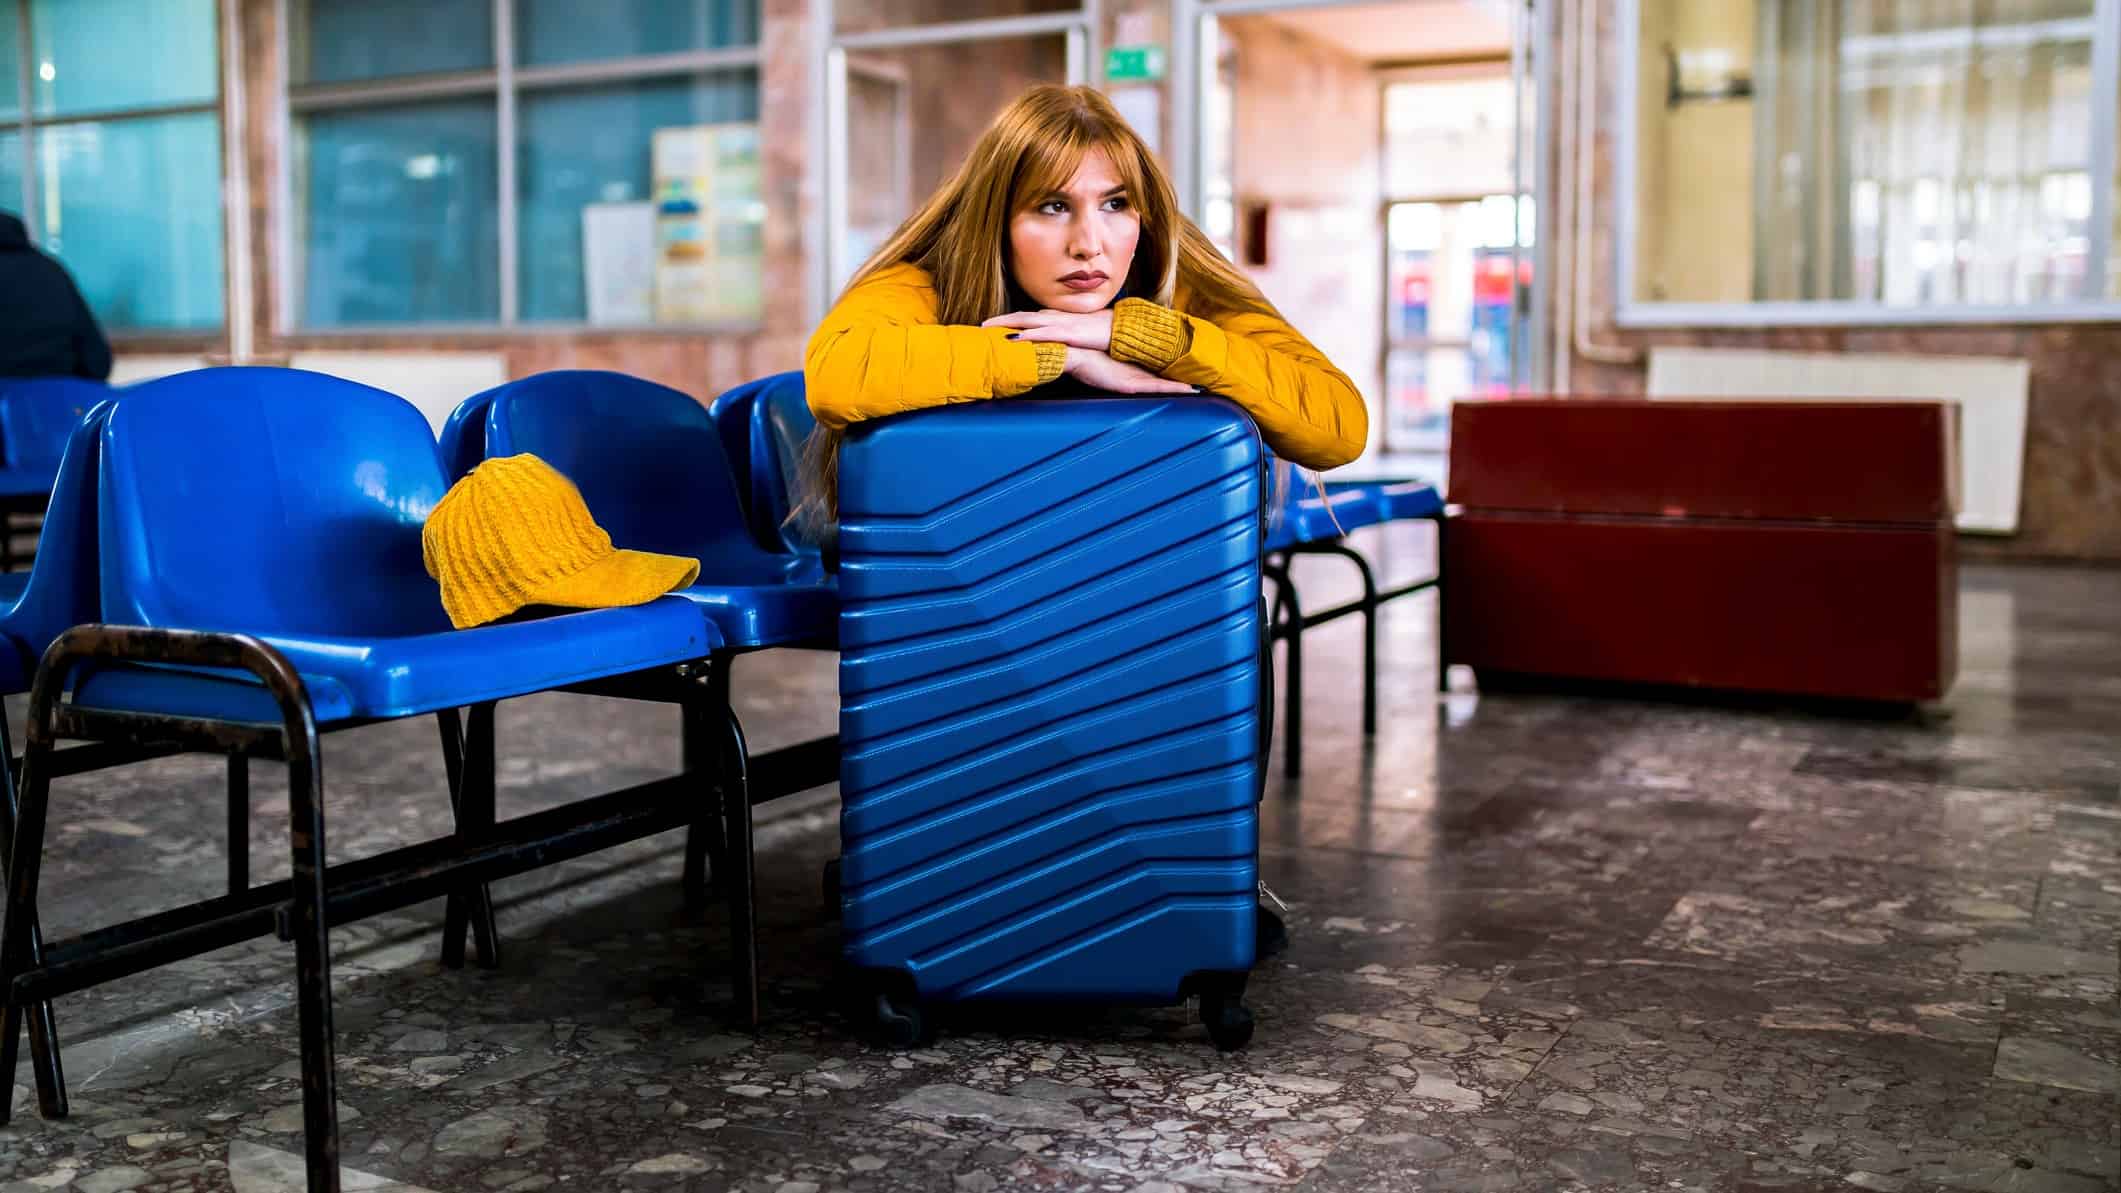 a sad woman sits leaning on her suitcase in a deserted airport lounge